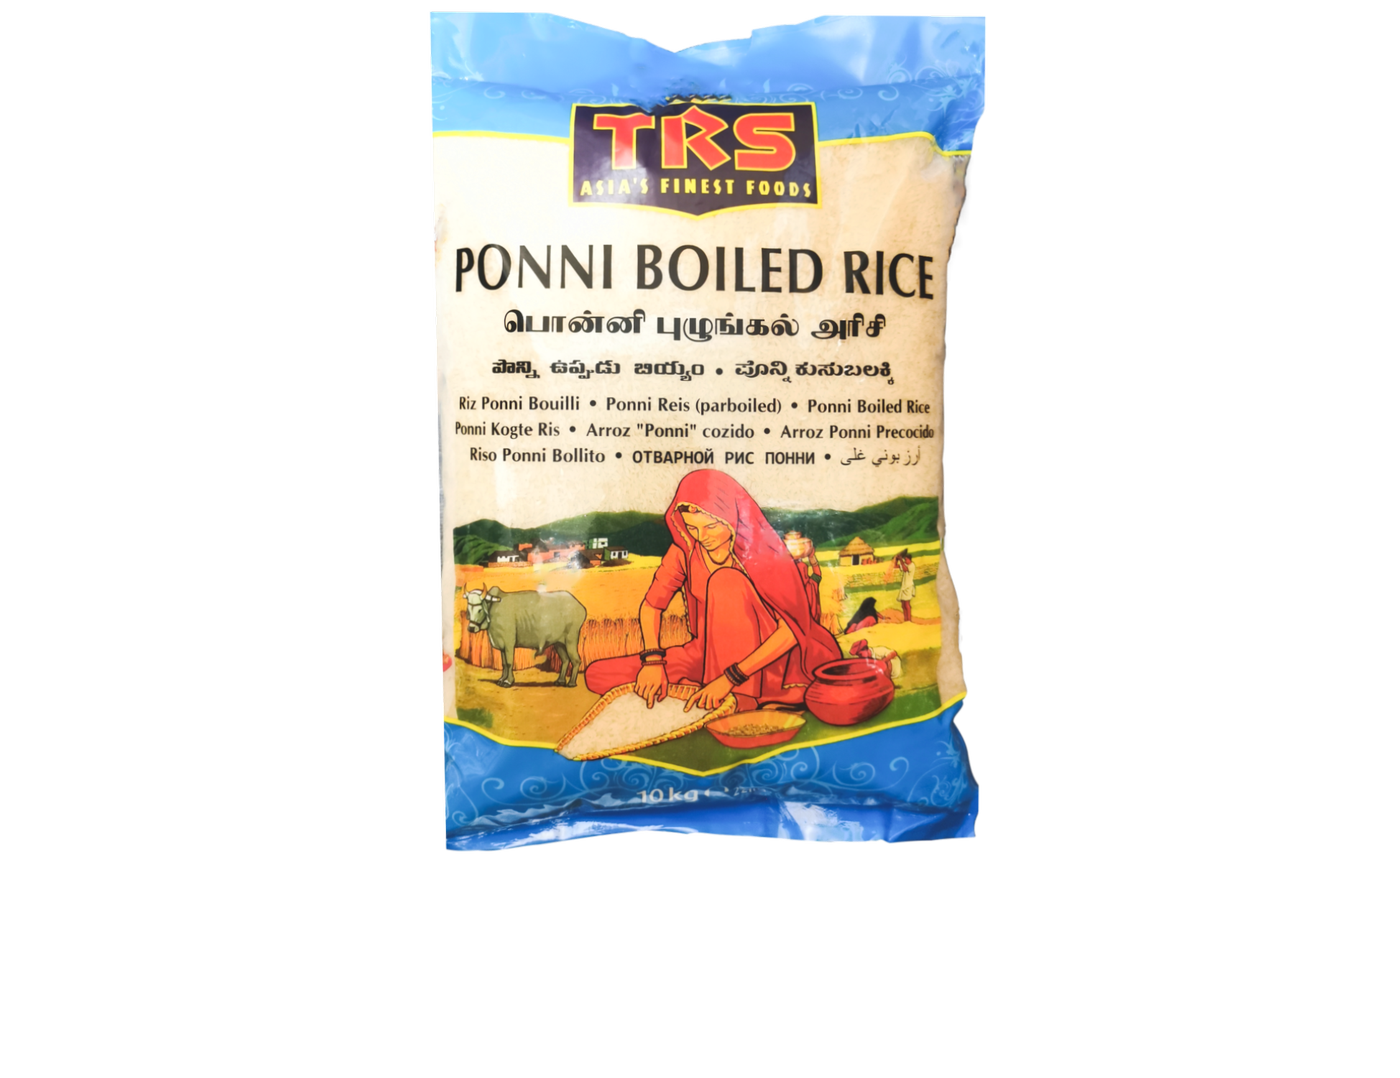 TRS Ponni Boiled Rice